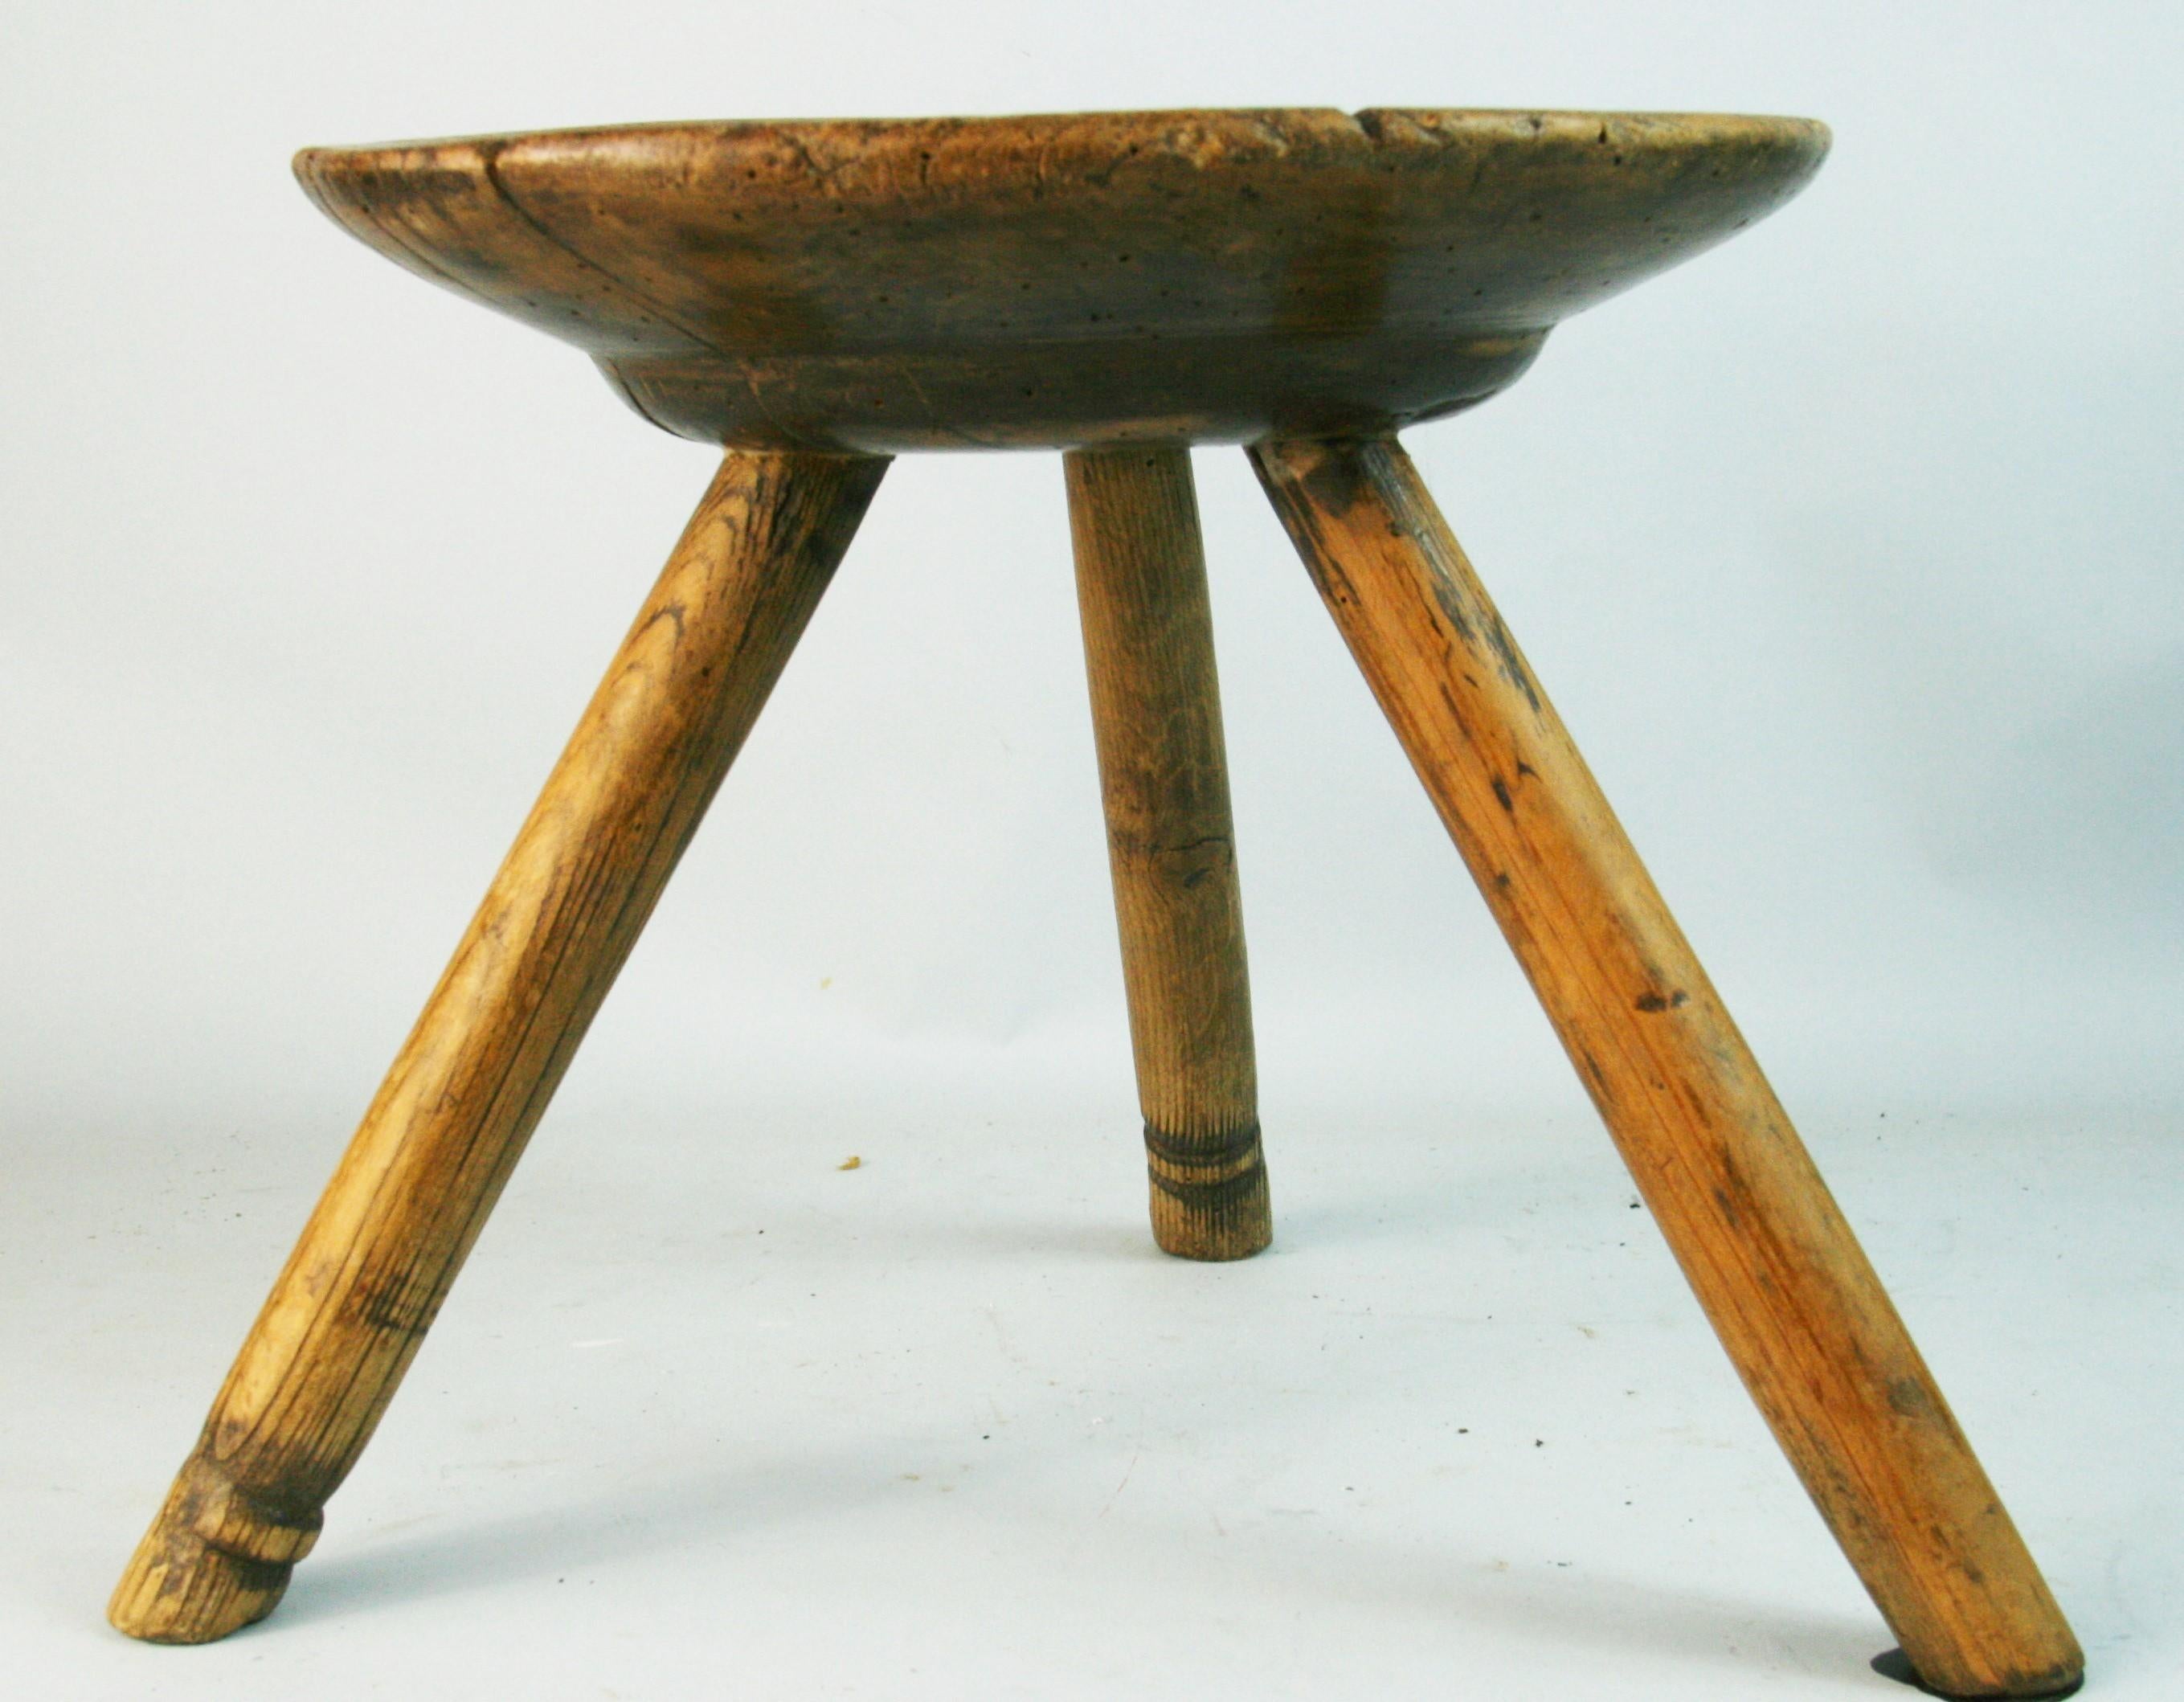 Antique Scandinavian Stool Late 19th Century In Good Condition For Sale In Douglas Manor, NY